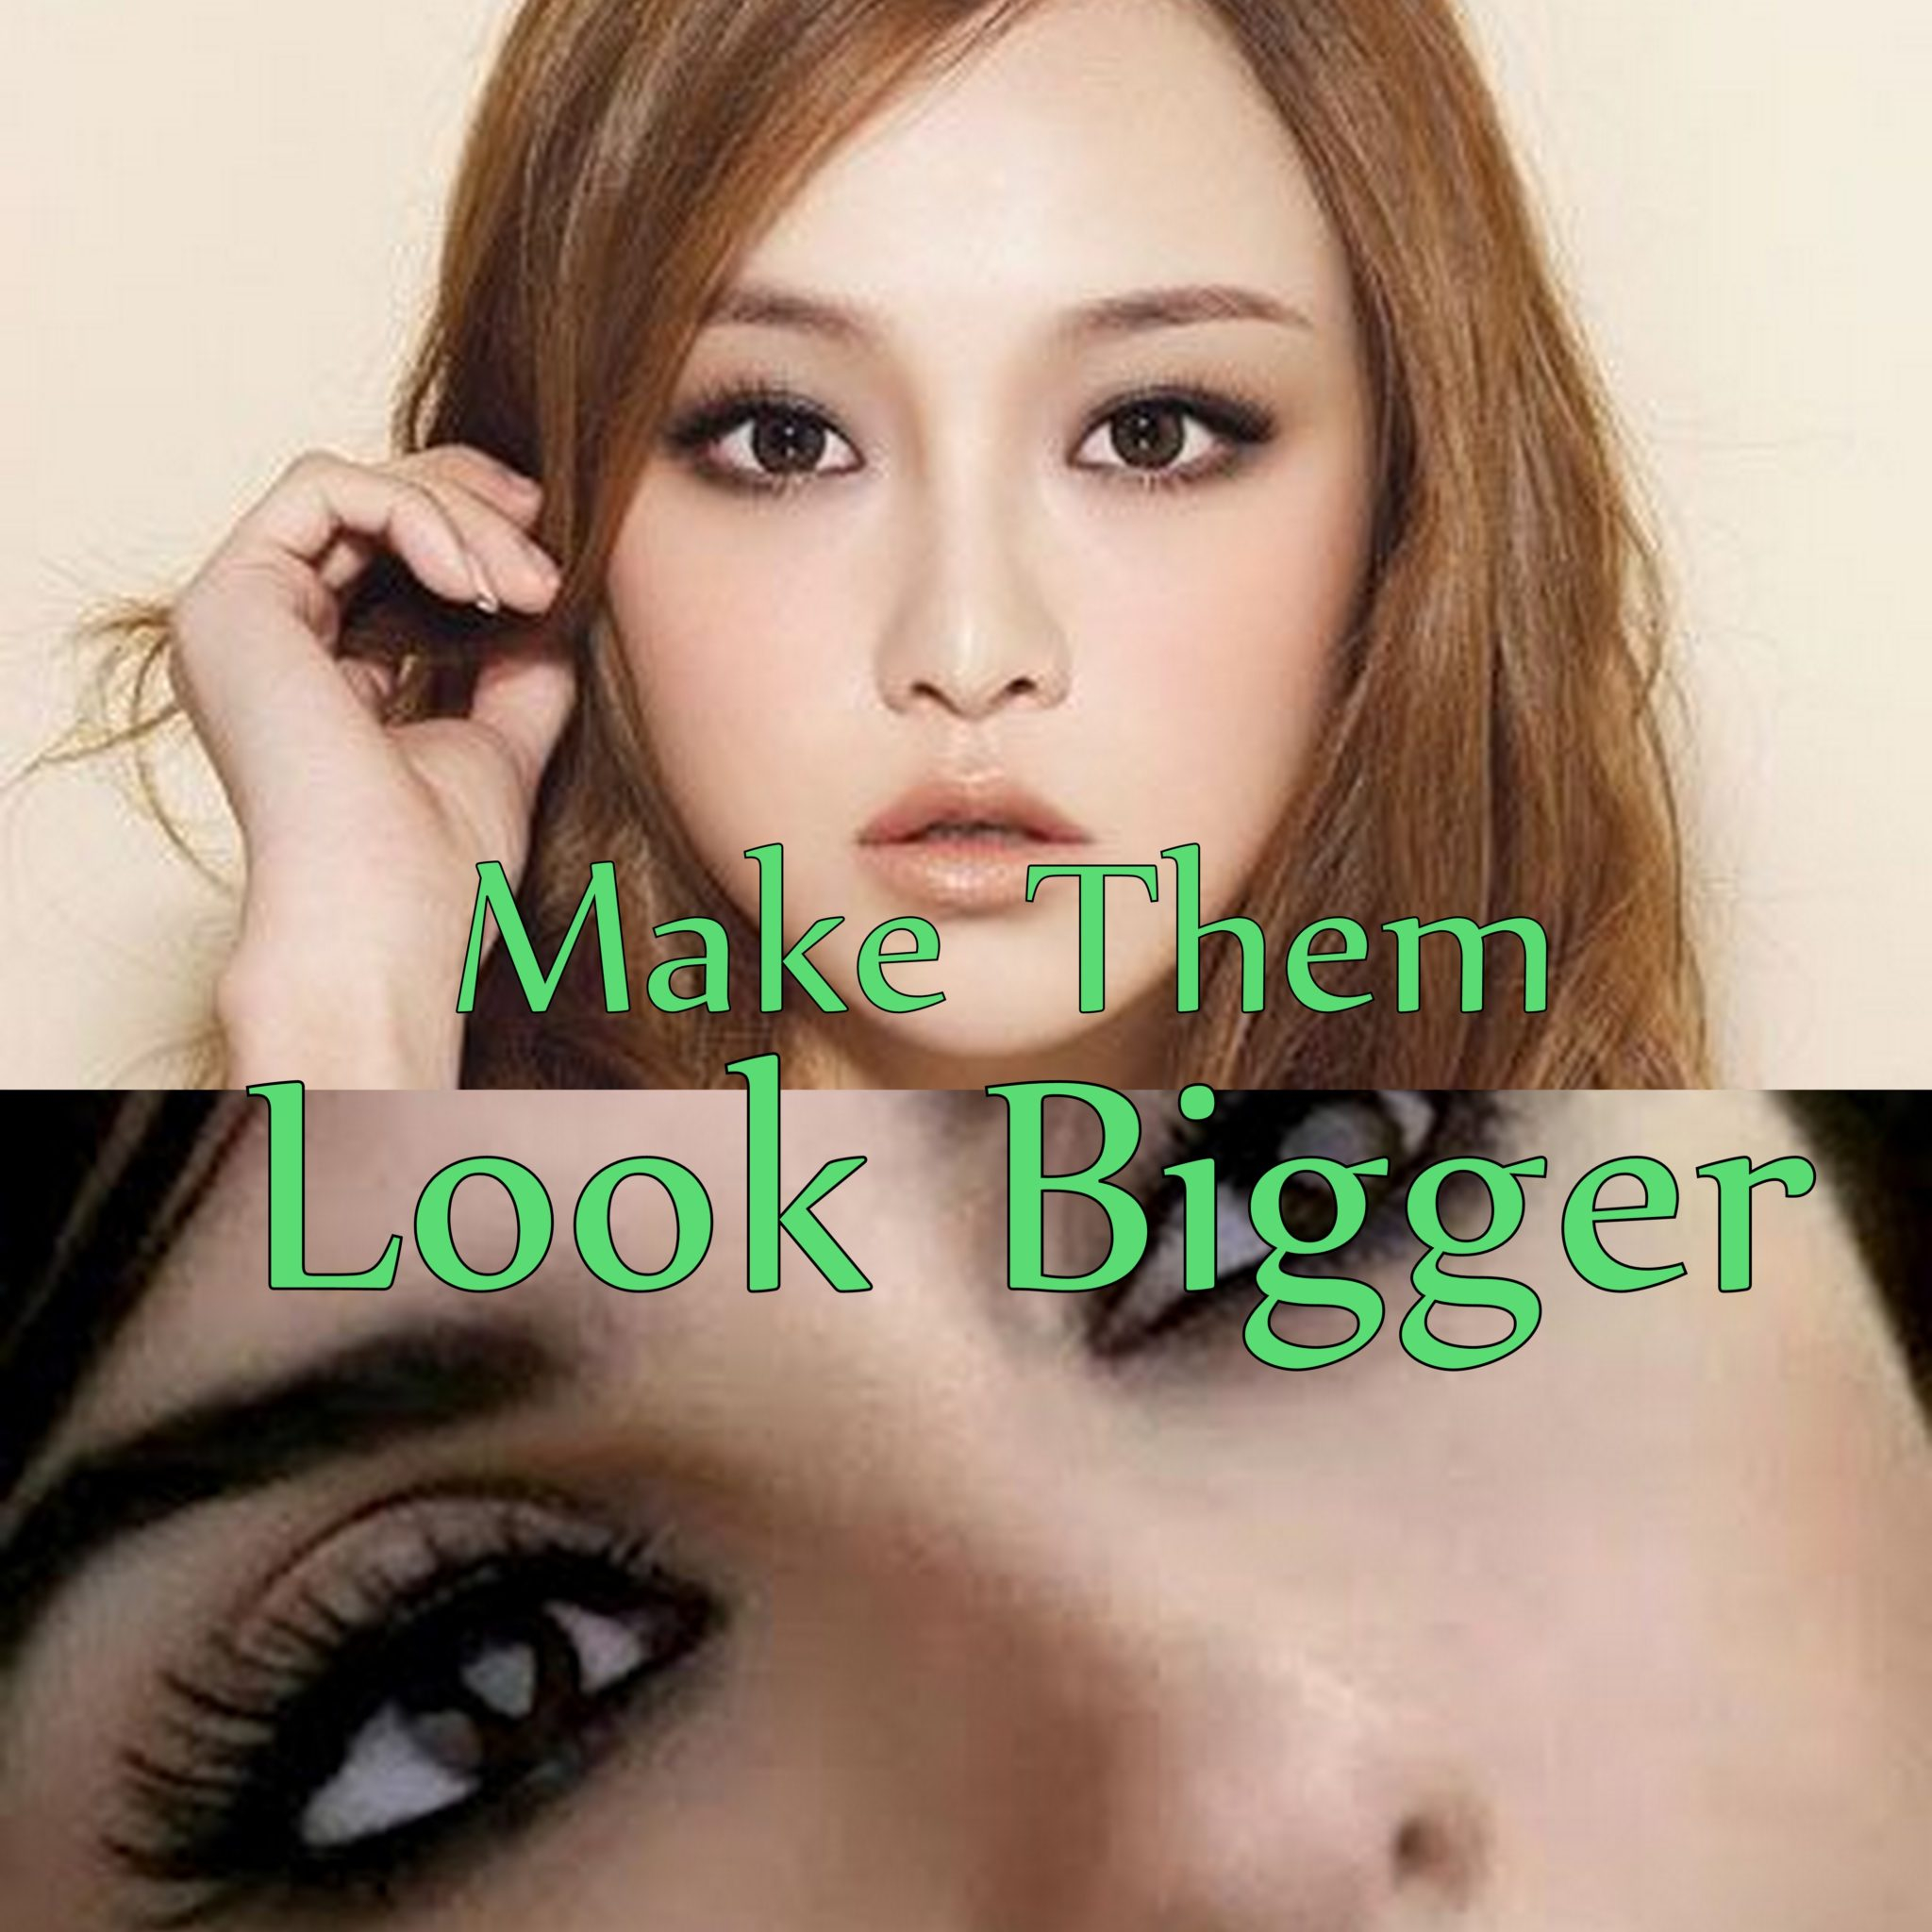 Makeup For Small Brown Eyes Eye Makeup For Small Eyes Make Them Look Bigger